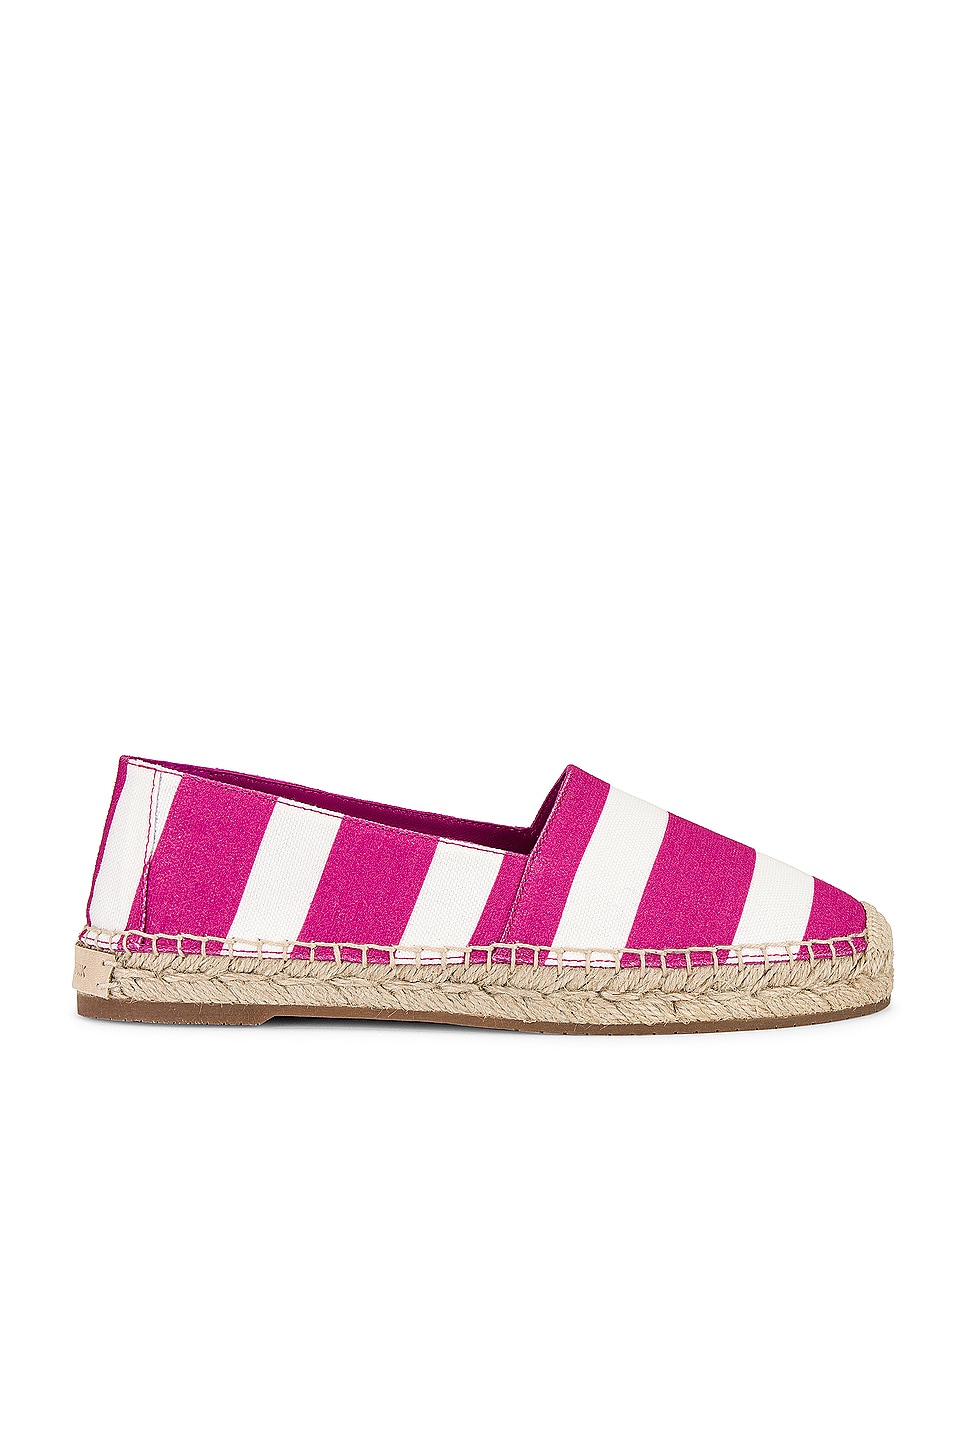 Image 1 of Manolo Blahnik Sombrille Espadrille in Bright Pink Striped Cotton Fabric